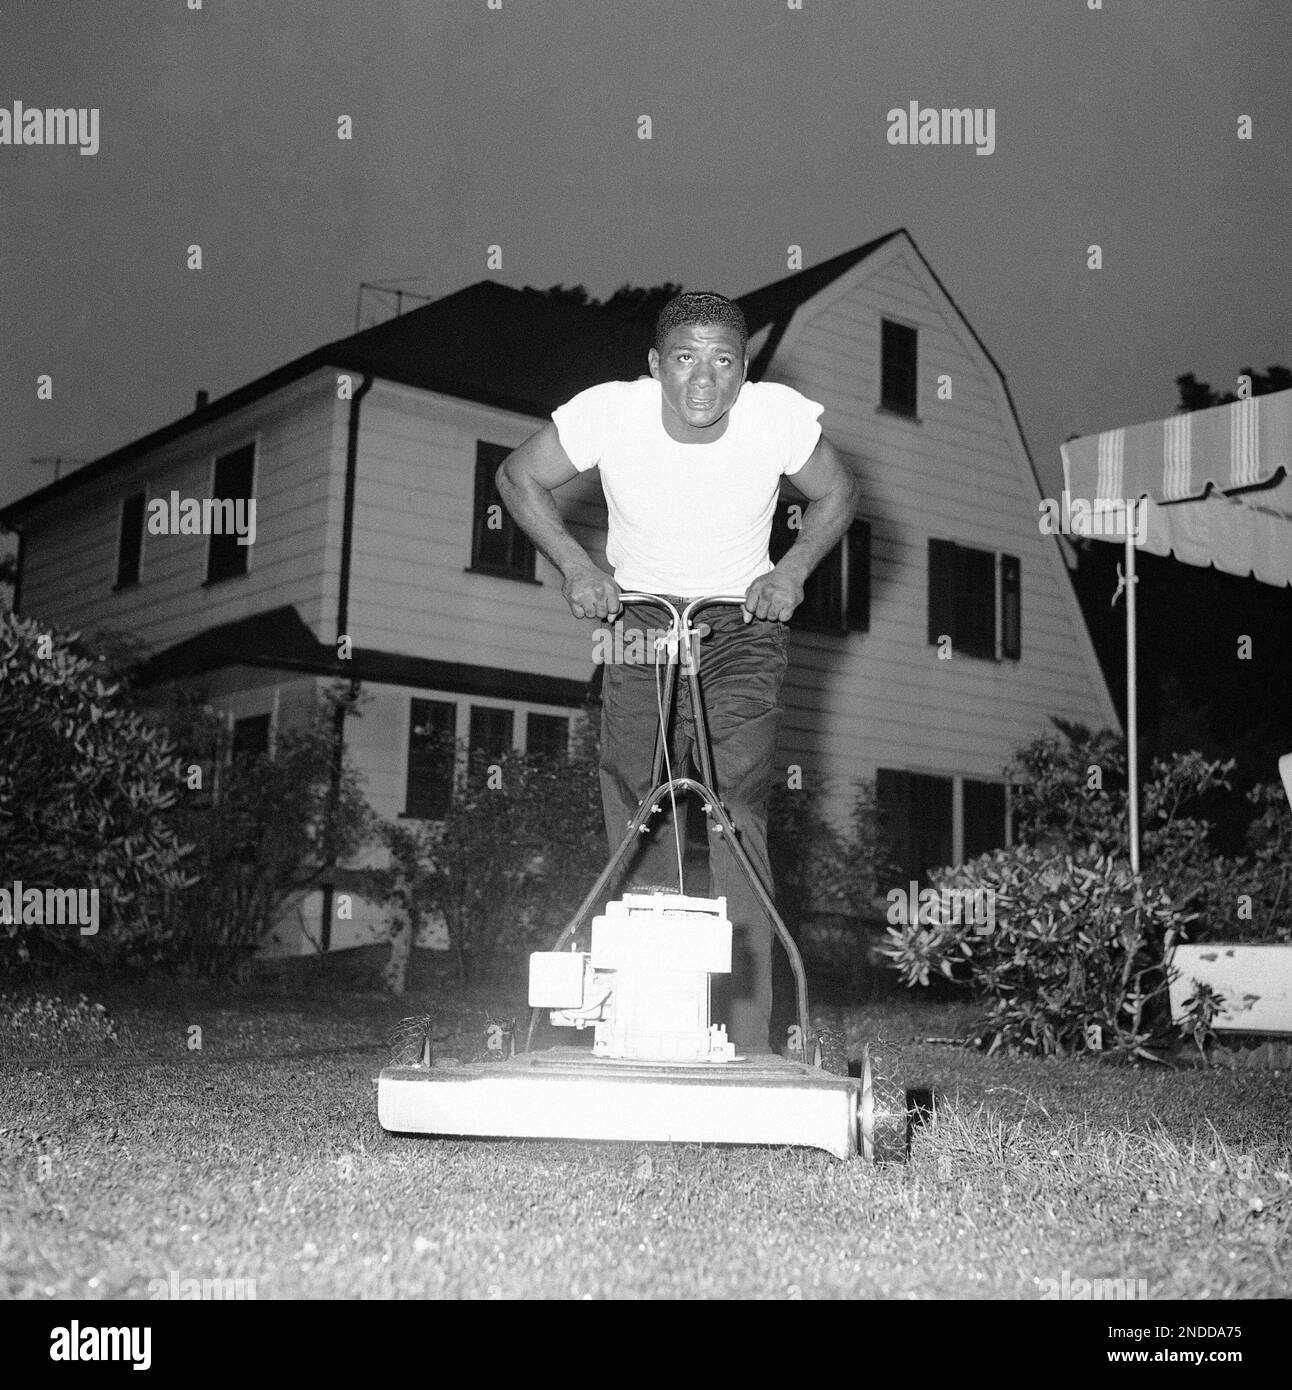 https://c8.alamy.com/comp/2NDDA75/ex-heavyweight-champion-floyd-patterson-mows-lawn-at-his-rockville-centre-ny-homejune-27-1959-patterson-lost-crown-the-night-before-after-being-knocked-down-seven-times-in-third-round-of-fight-at-new-yorks-yankee-stadium-swedens-ingemar-johansson-is-new-champ-ap-photomarty-lederhandler-2NDDA75.jpg